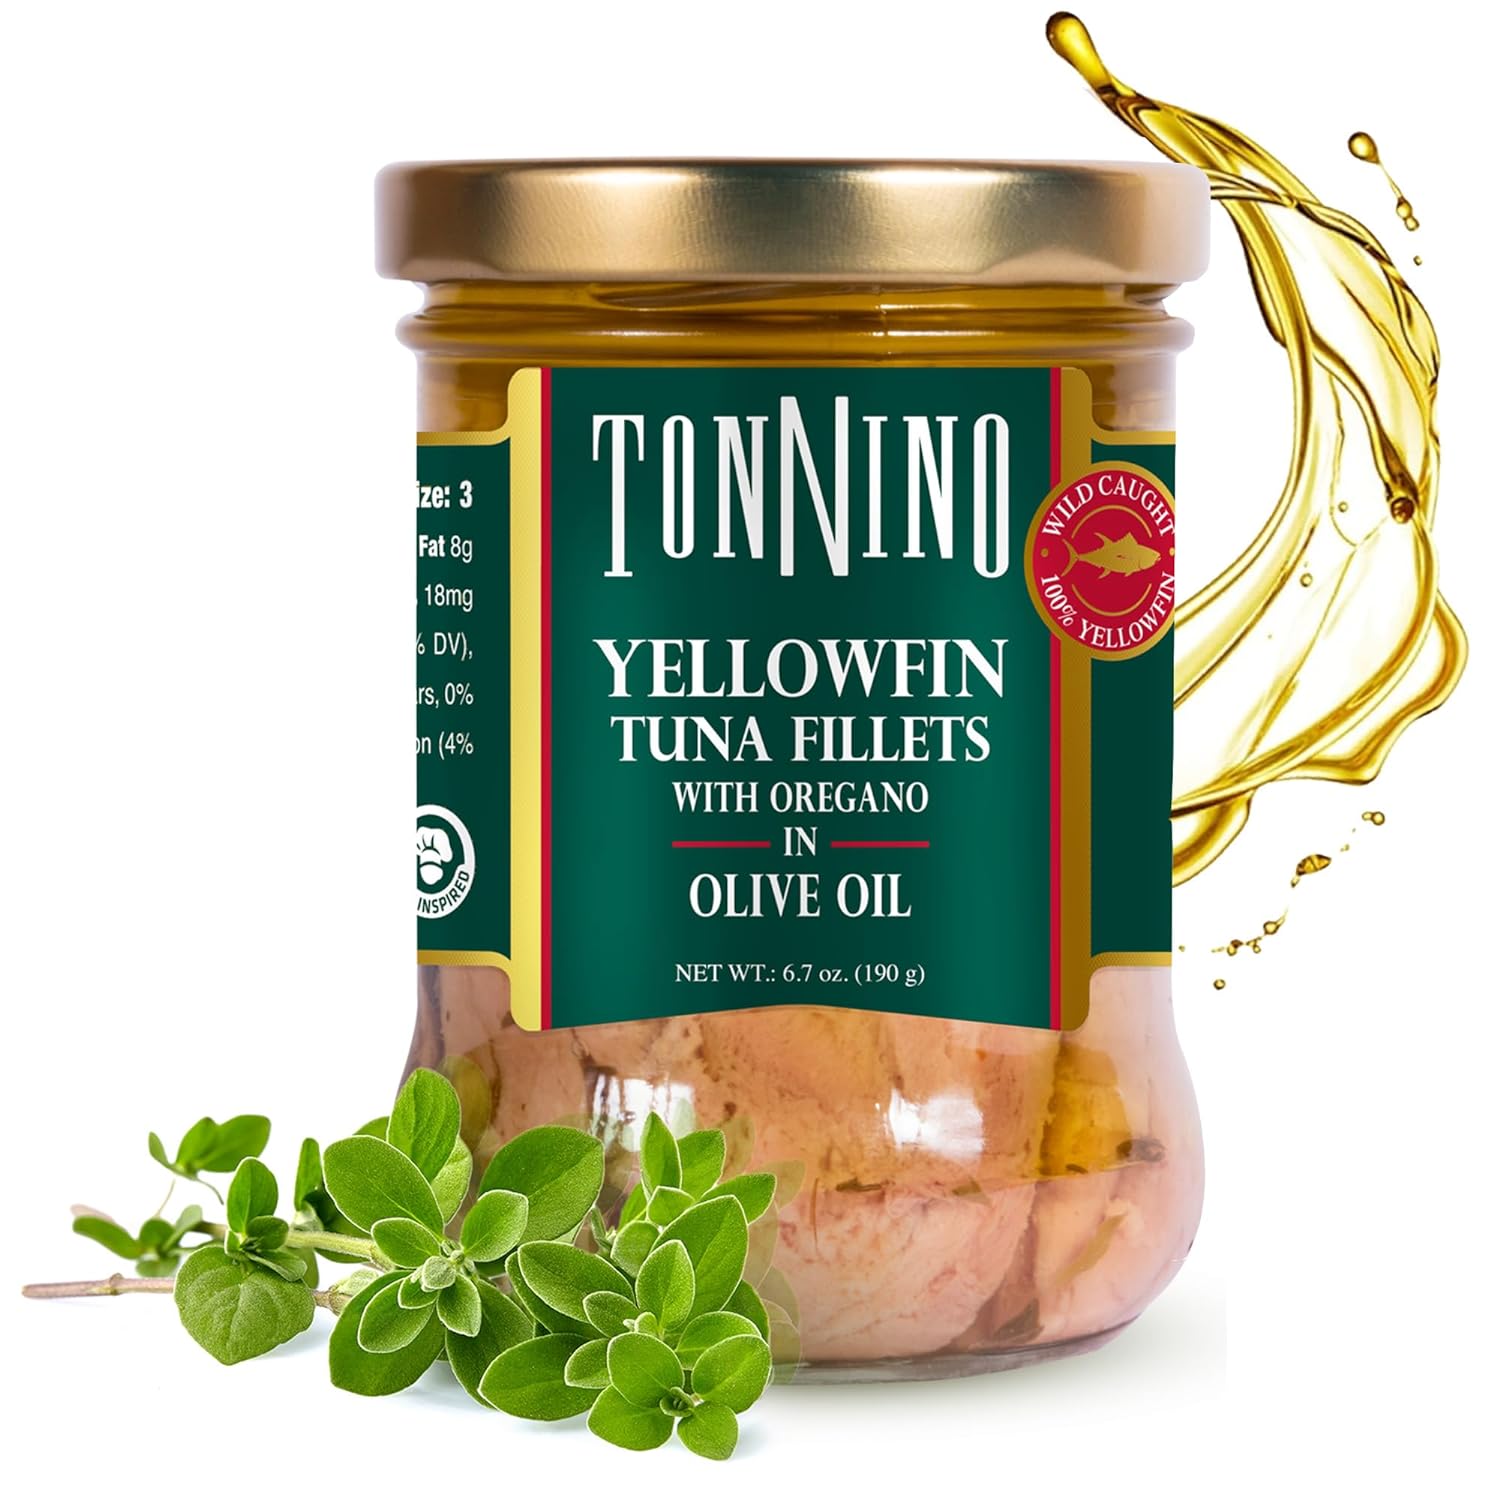 Tonnino Tuna Fillets Low Calorie and Gluten Free Yellowfin Jarred Premium Tuna with Oregano in Olive Oil 6.7 oz (Pack of 6)